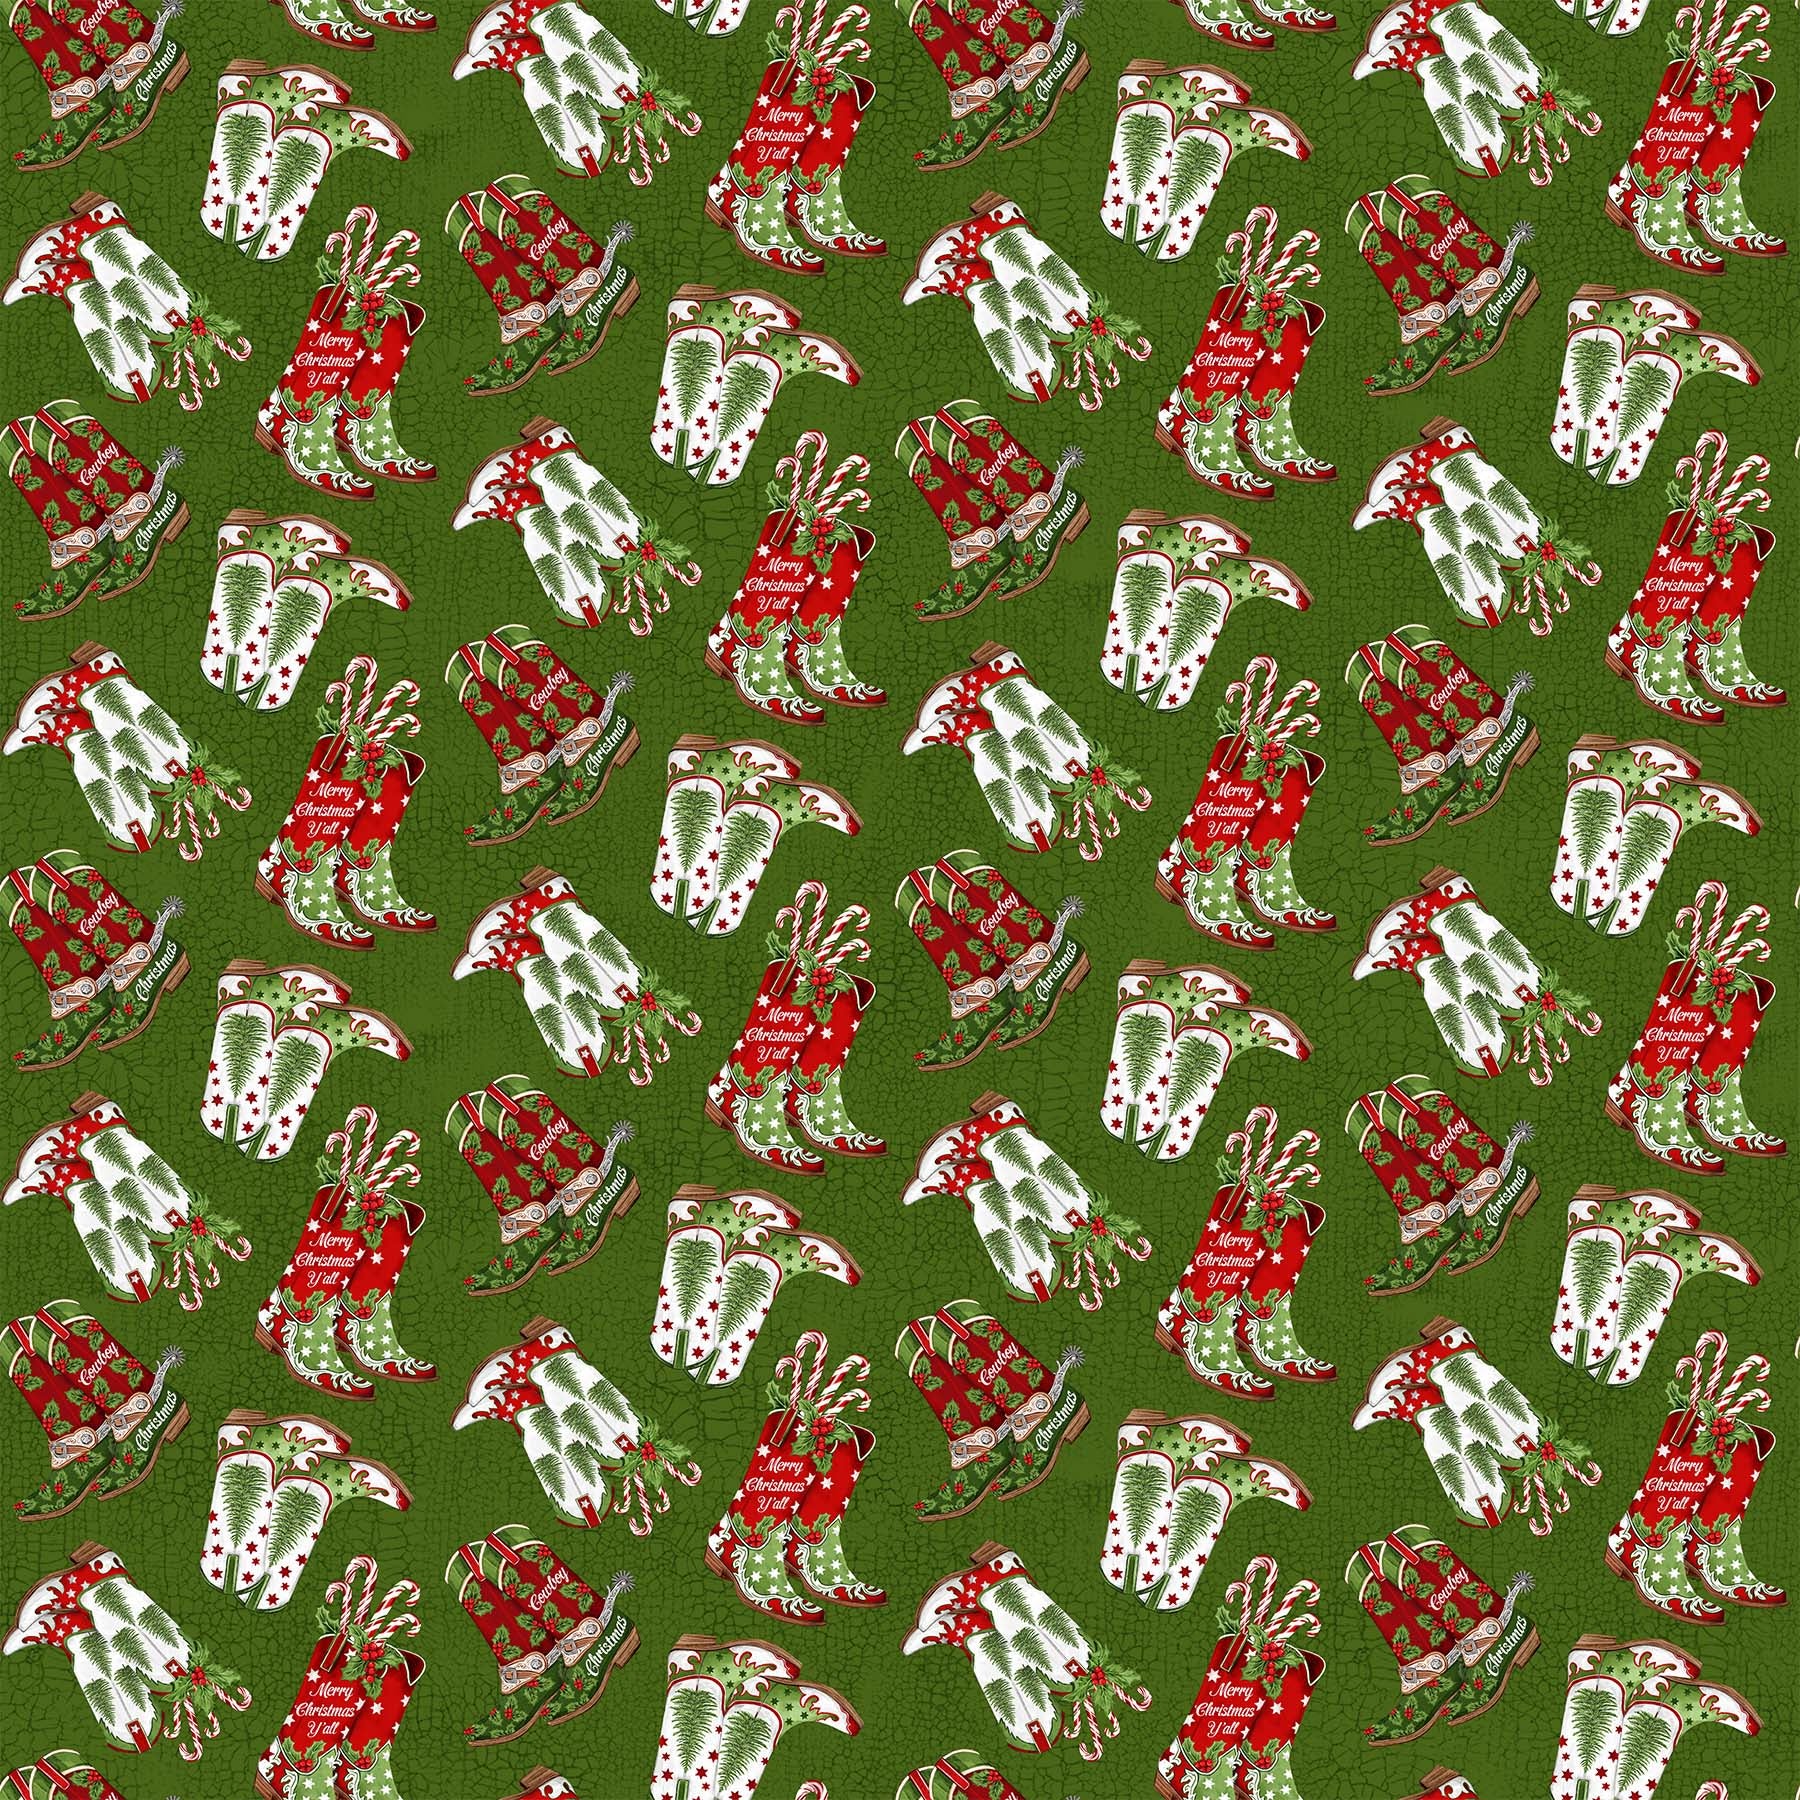 Howdy Christmas - Cowboy Boots on Green with Candy Canes